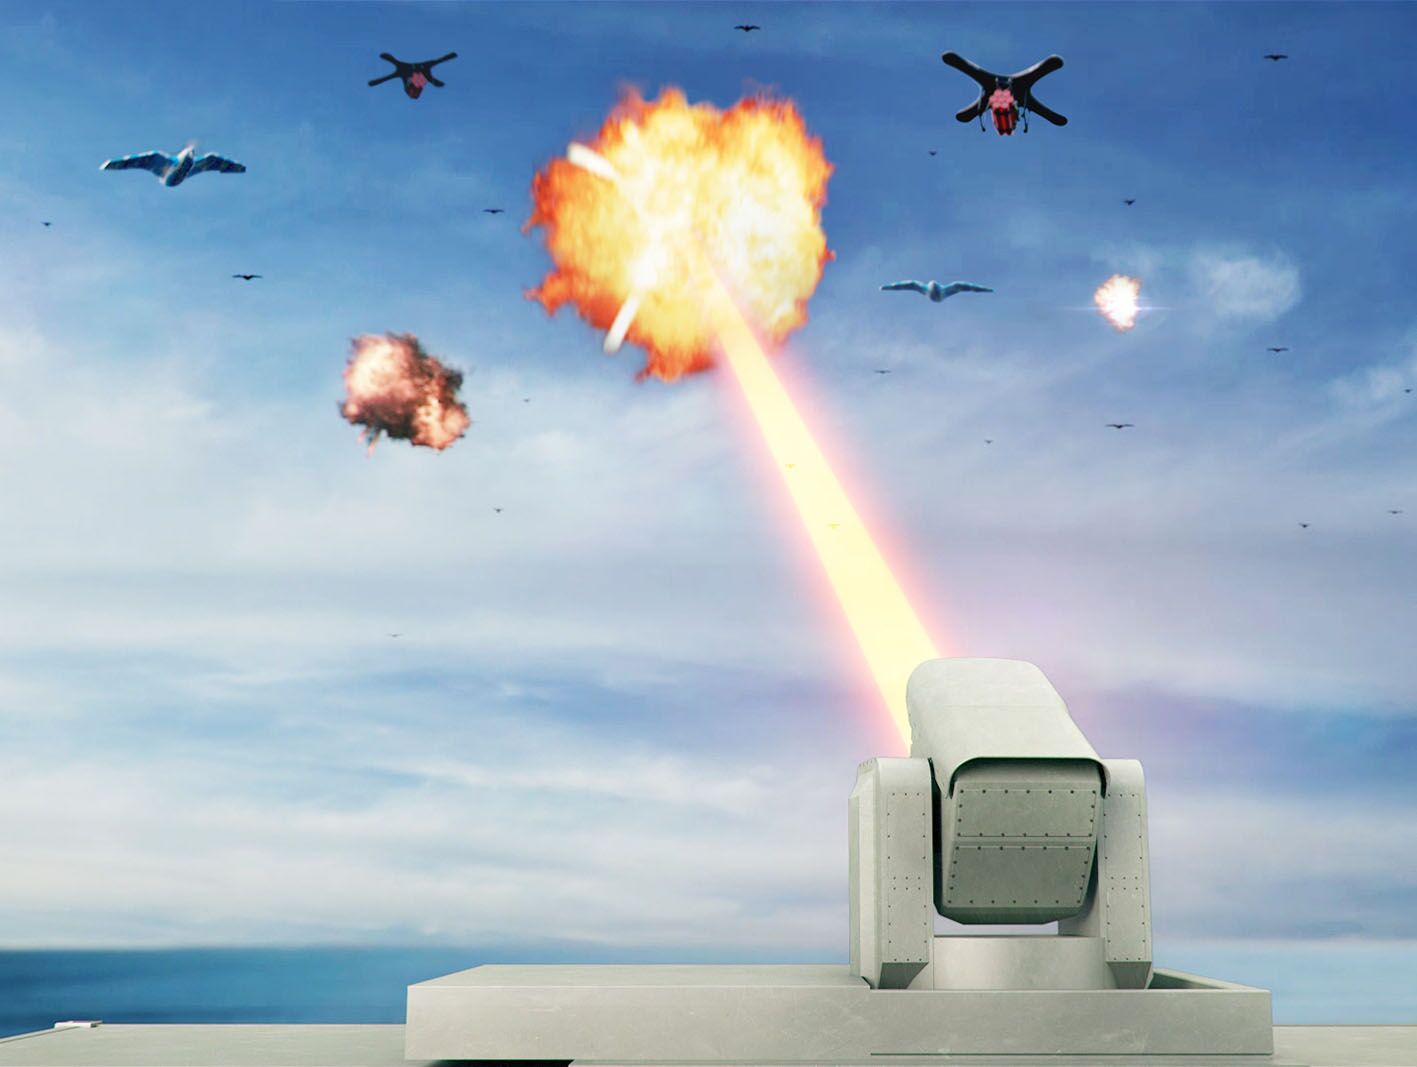 South Korea's Hanwha Corporation announced on 31 May that it has been awarded a USD21.9 million contract to develop a laser oscillator for use in future laser-based, short-range air-defence weapon systems. (Hanwha Corporation)